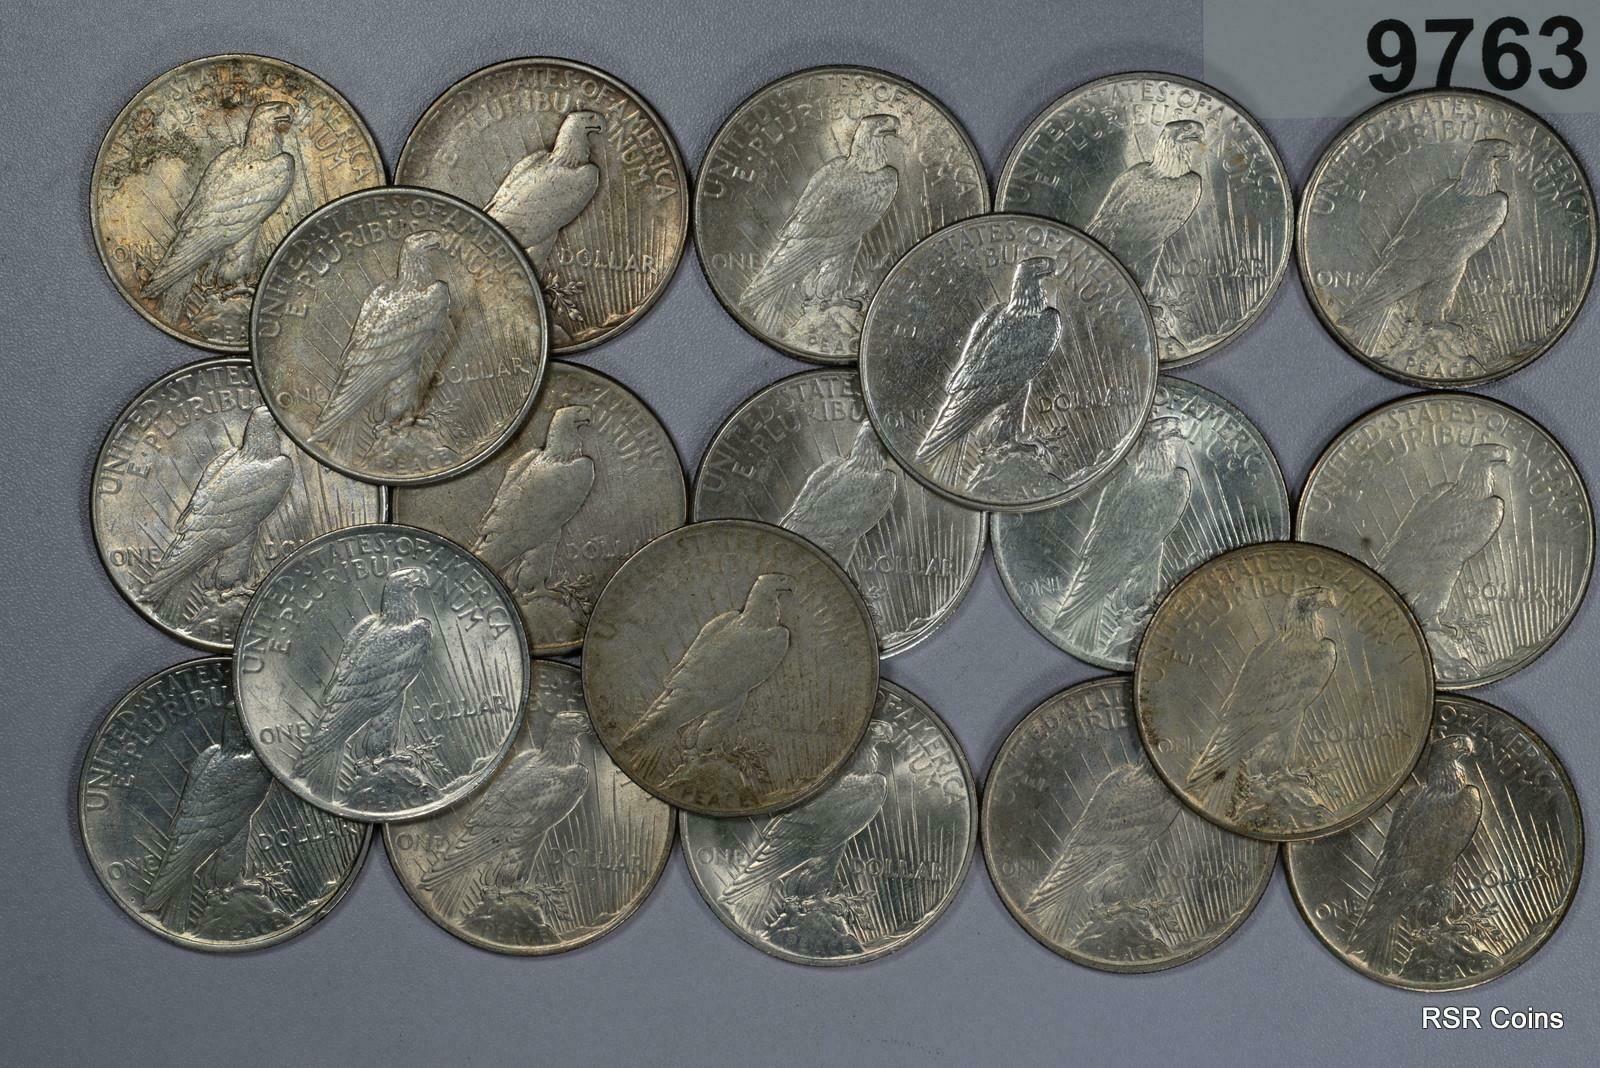 ROLL OF 20 PEACE SILVER DOLLARS FEW VF MOST COINS ARE XF TO AU++ !! #9763